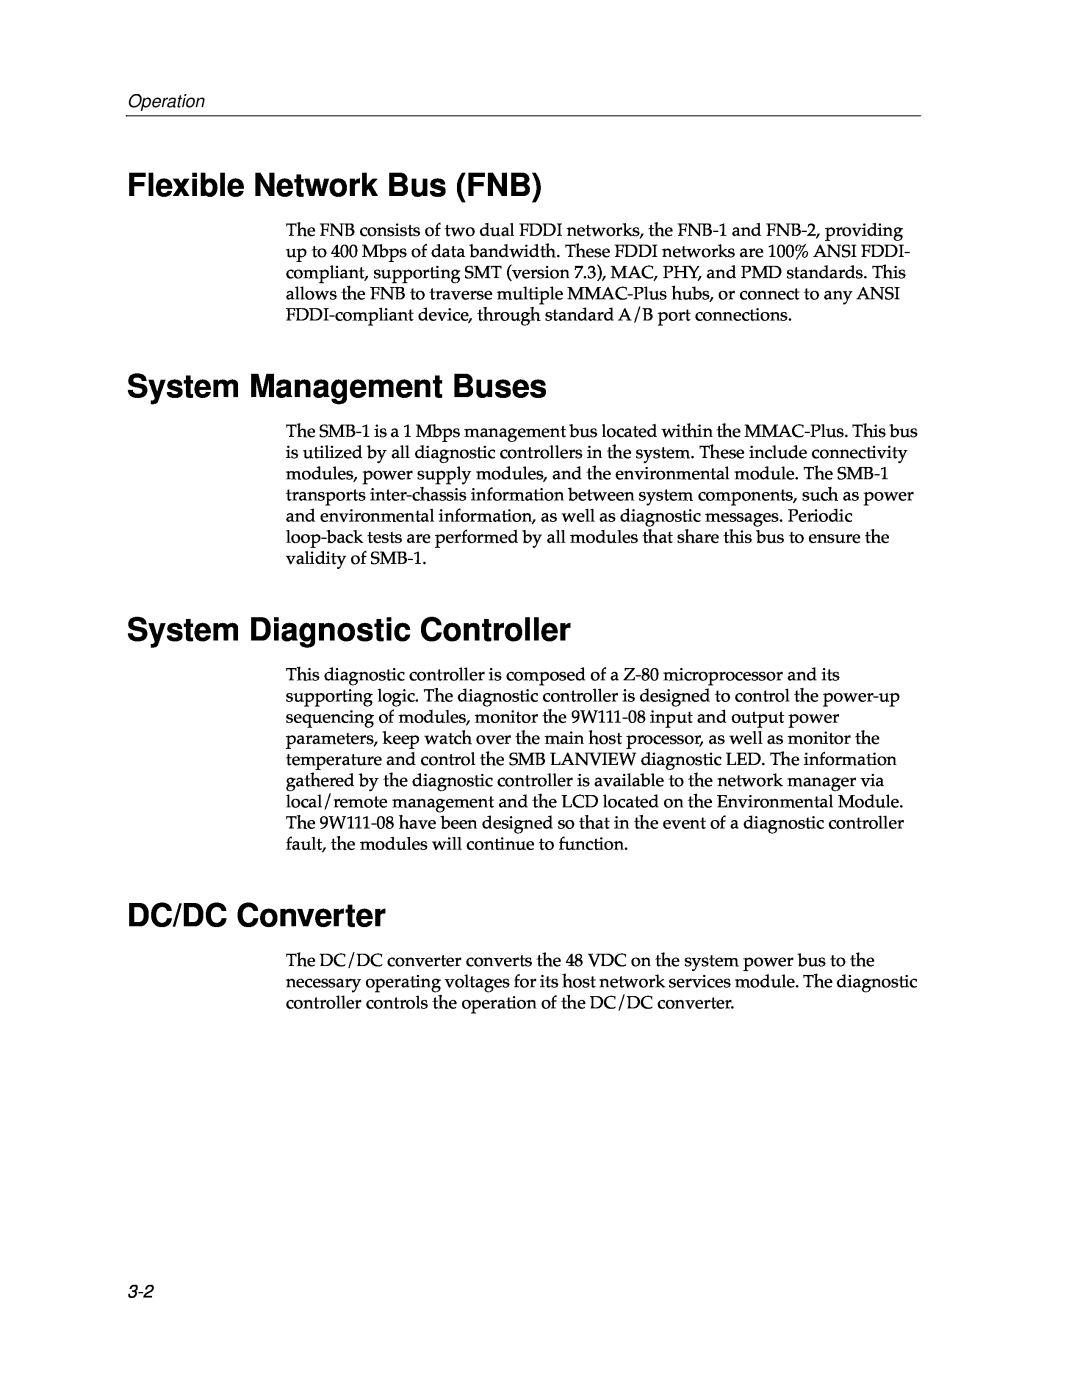 Cabletron Systems 9W111-08 Flexible Network Bus FNB, System Management Buses, System Diagnostic Controller, Operation 